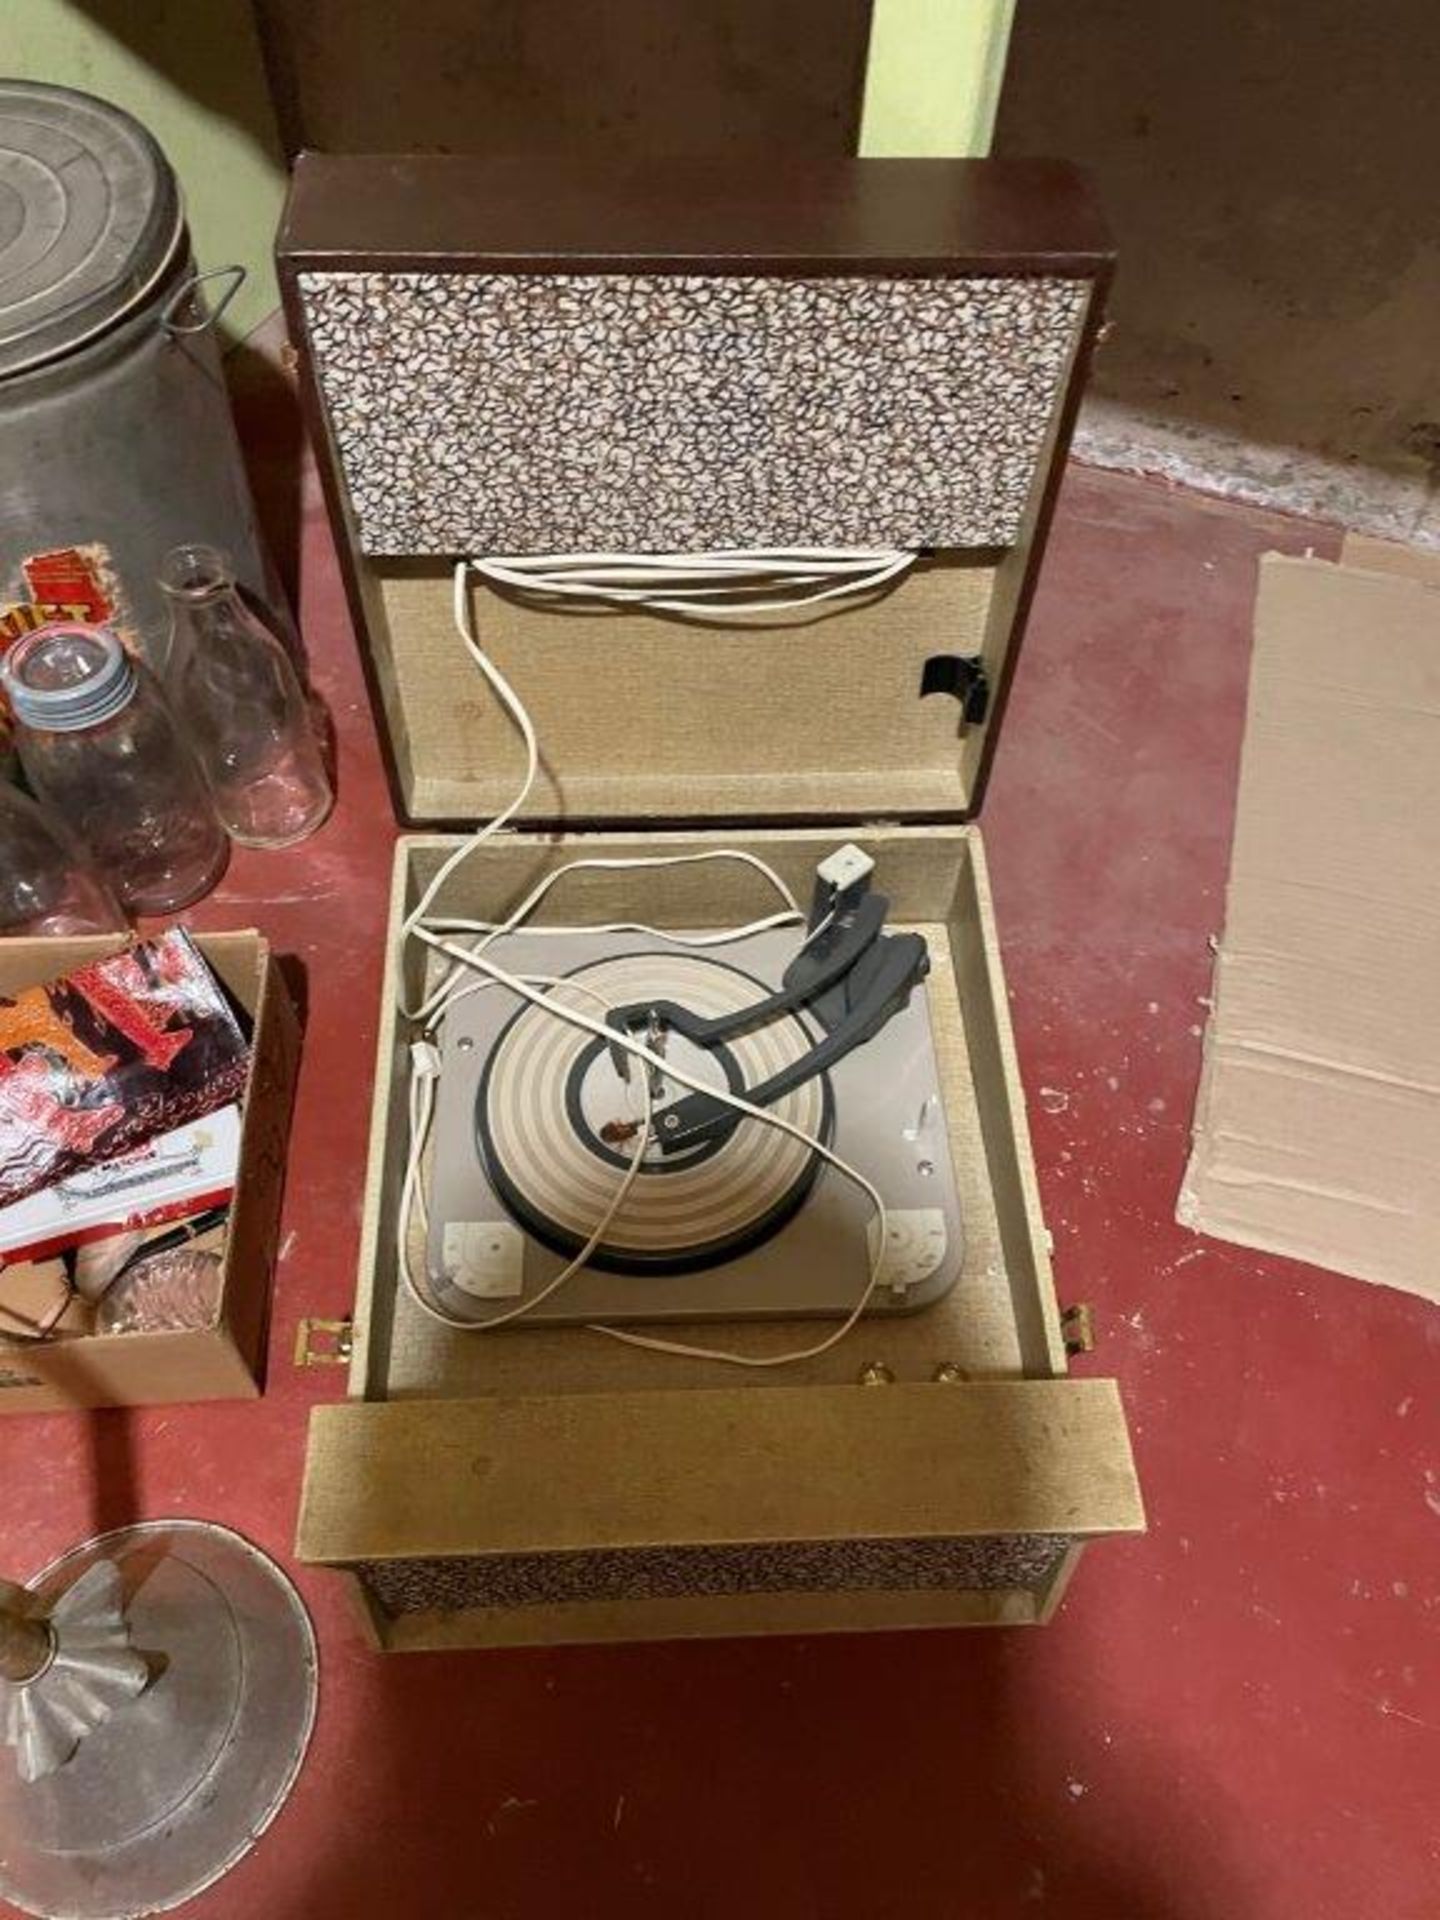 L/O RCA VICTOR RECORD PLAYER, GLASS JARS AND JUGS, METAL CANS, ETC. - Image 3 of 5